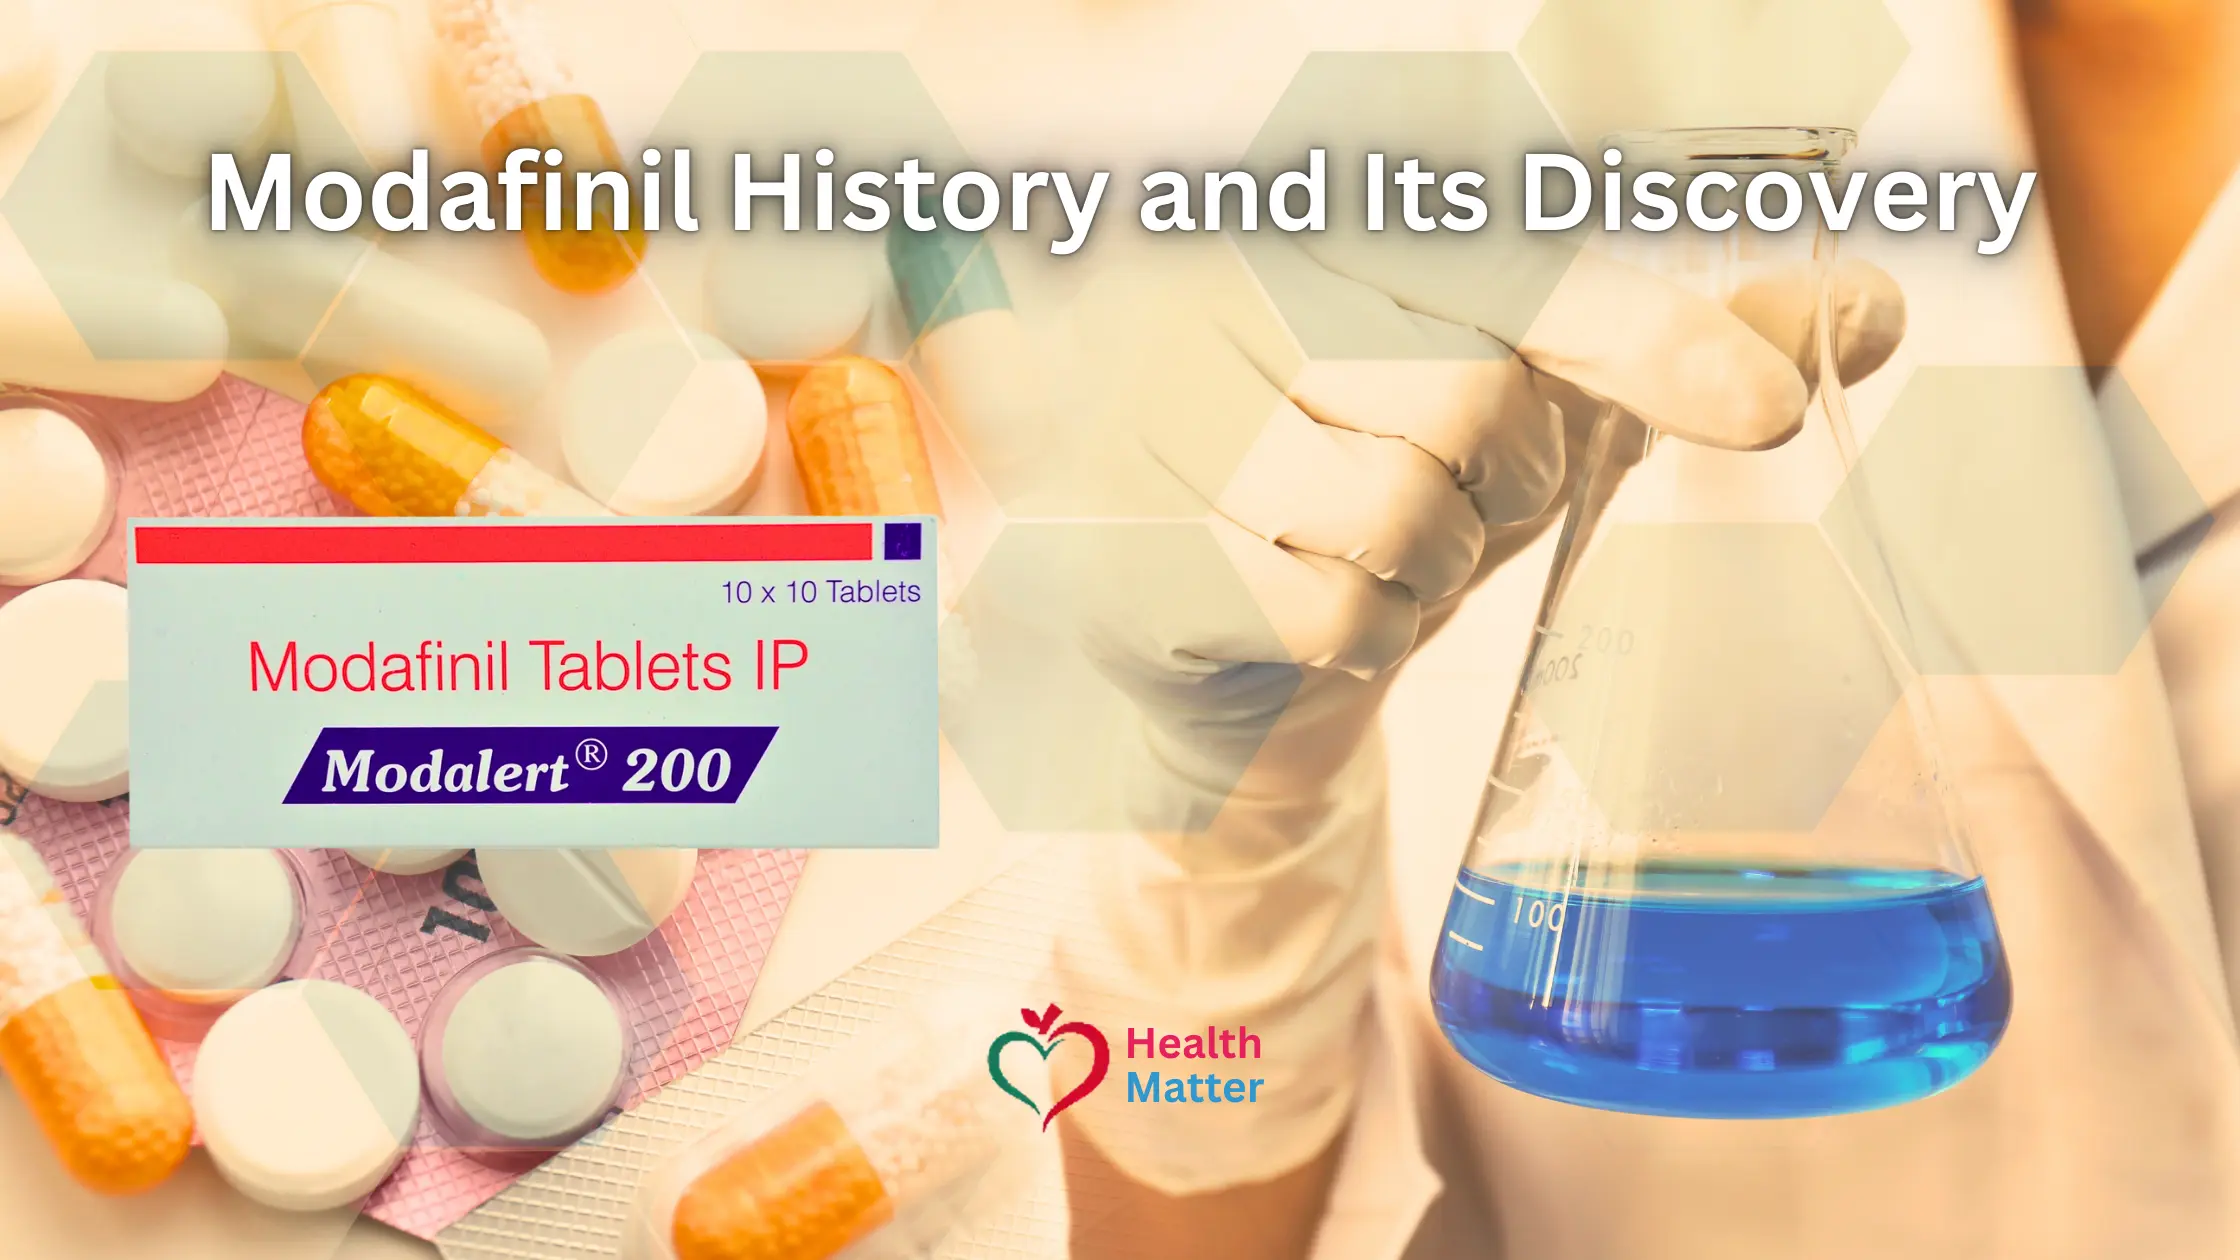 Modafinil History and Its Discovery